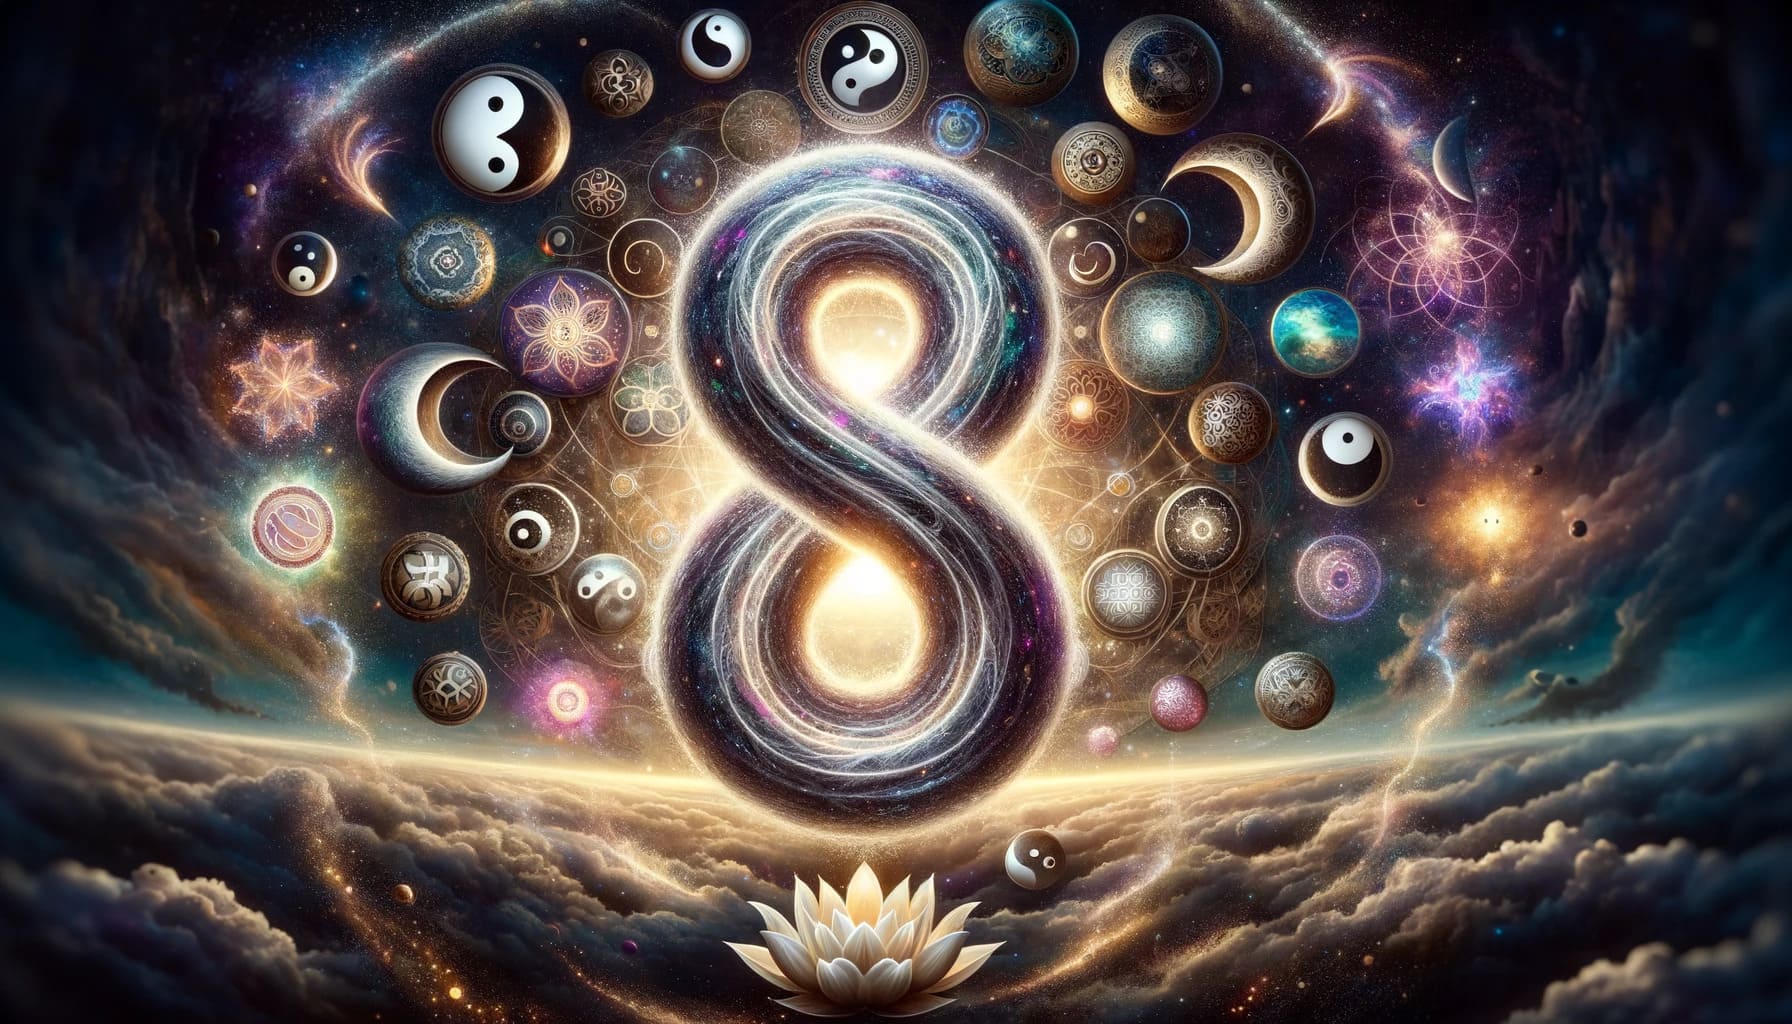 A profound and mystical representation of the universal symbolism of the number 8. The image features a majestic figure 8 lying horizontally resembli